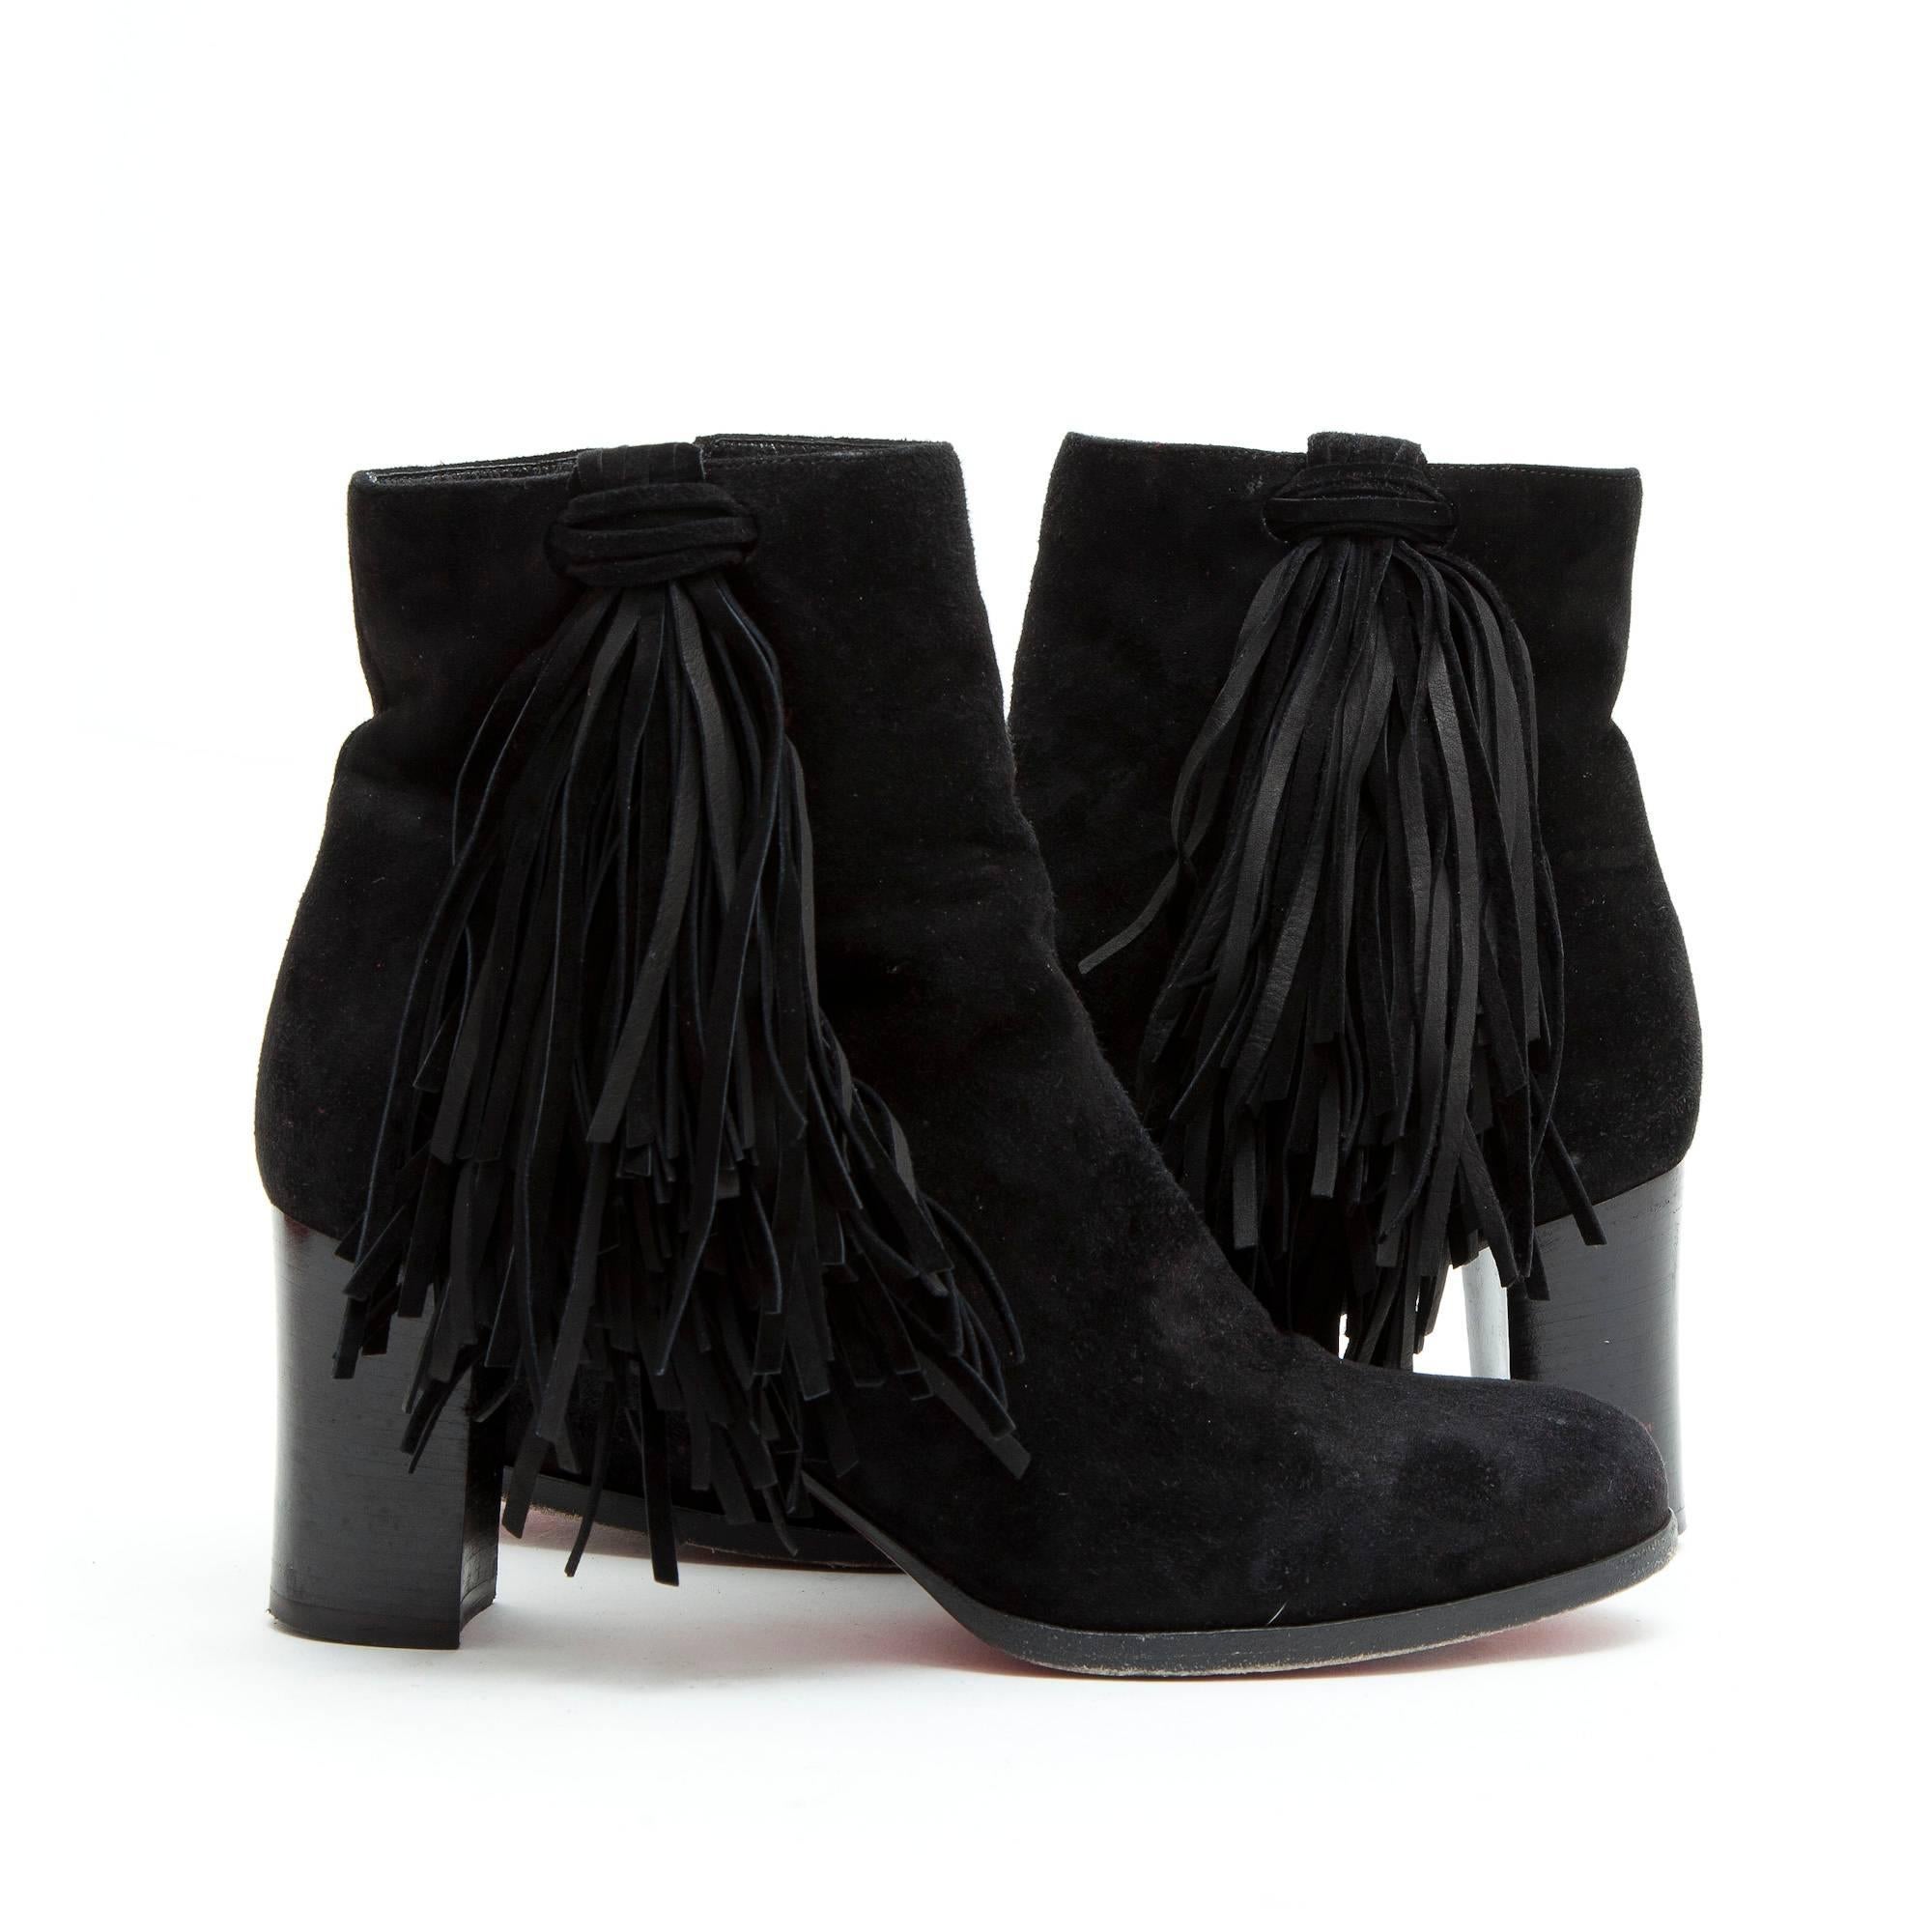 CHRISTIAN LOUBOUTIN Ankle Boots in Black Suede Calfskin Size 39FR 1